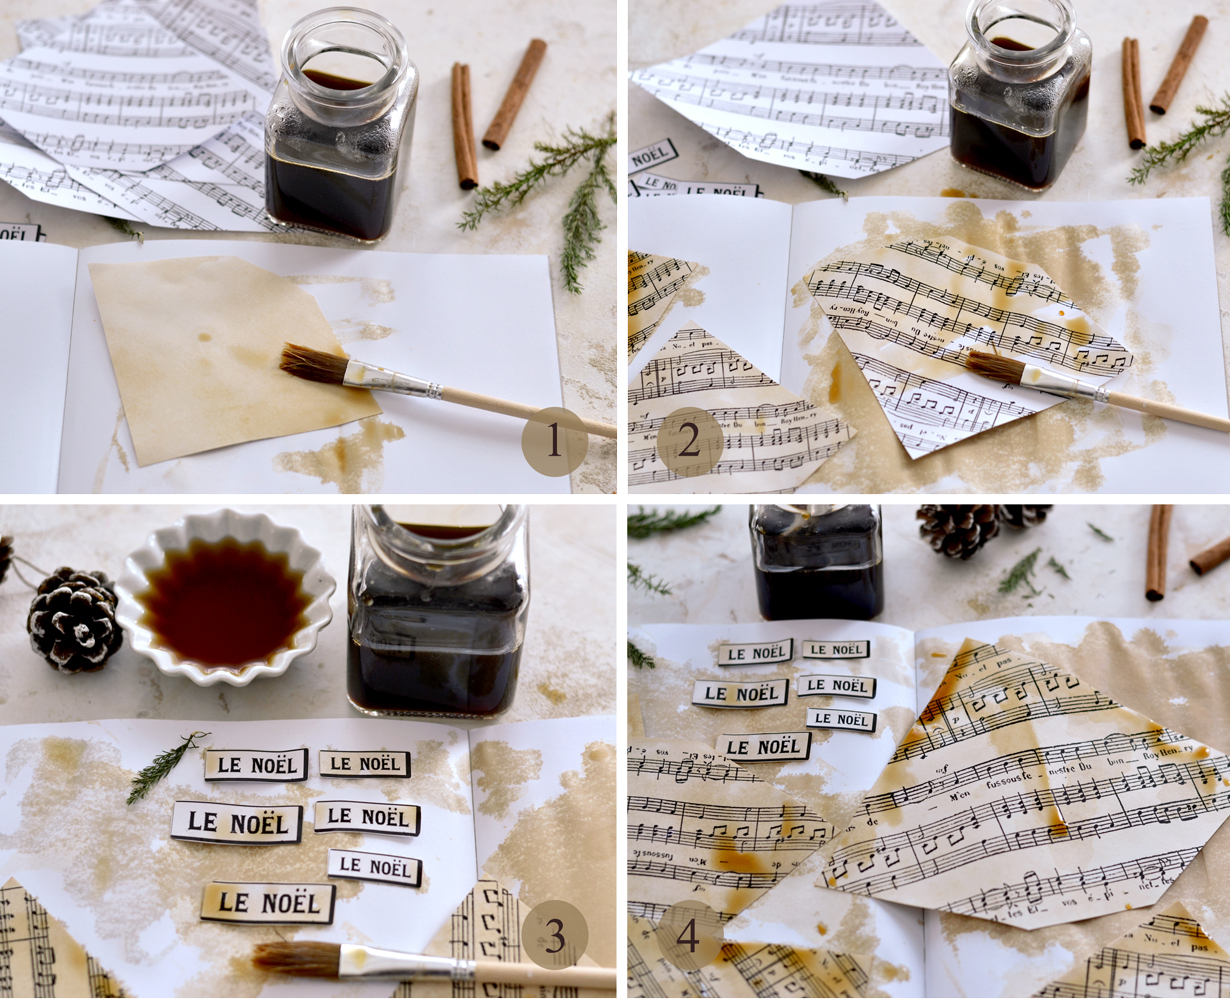 The instructions for distressing the paper cone templates with coffee (`1-4)